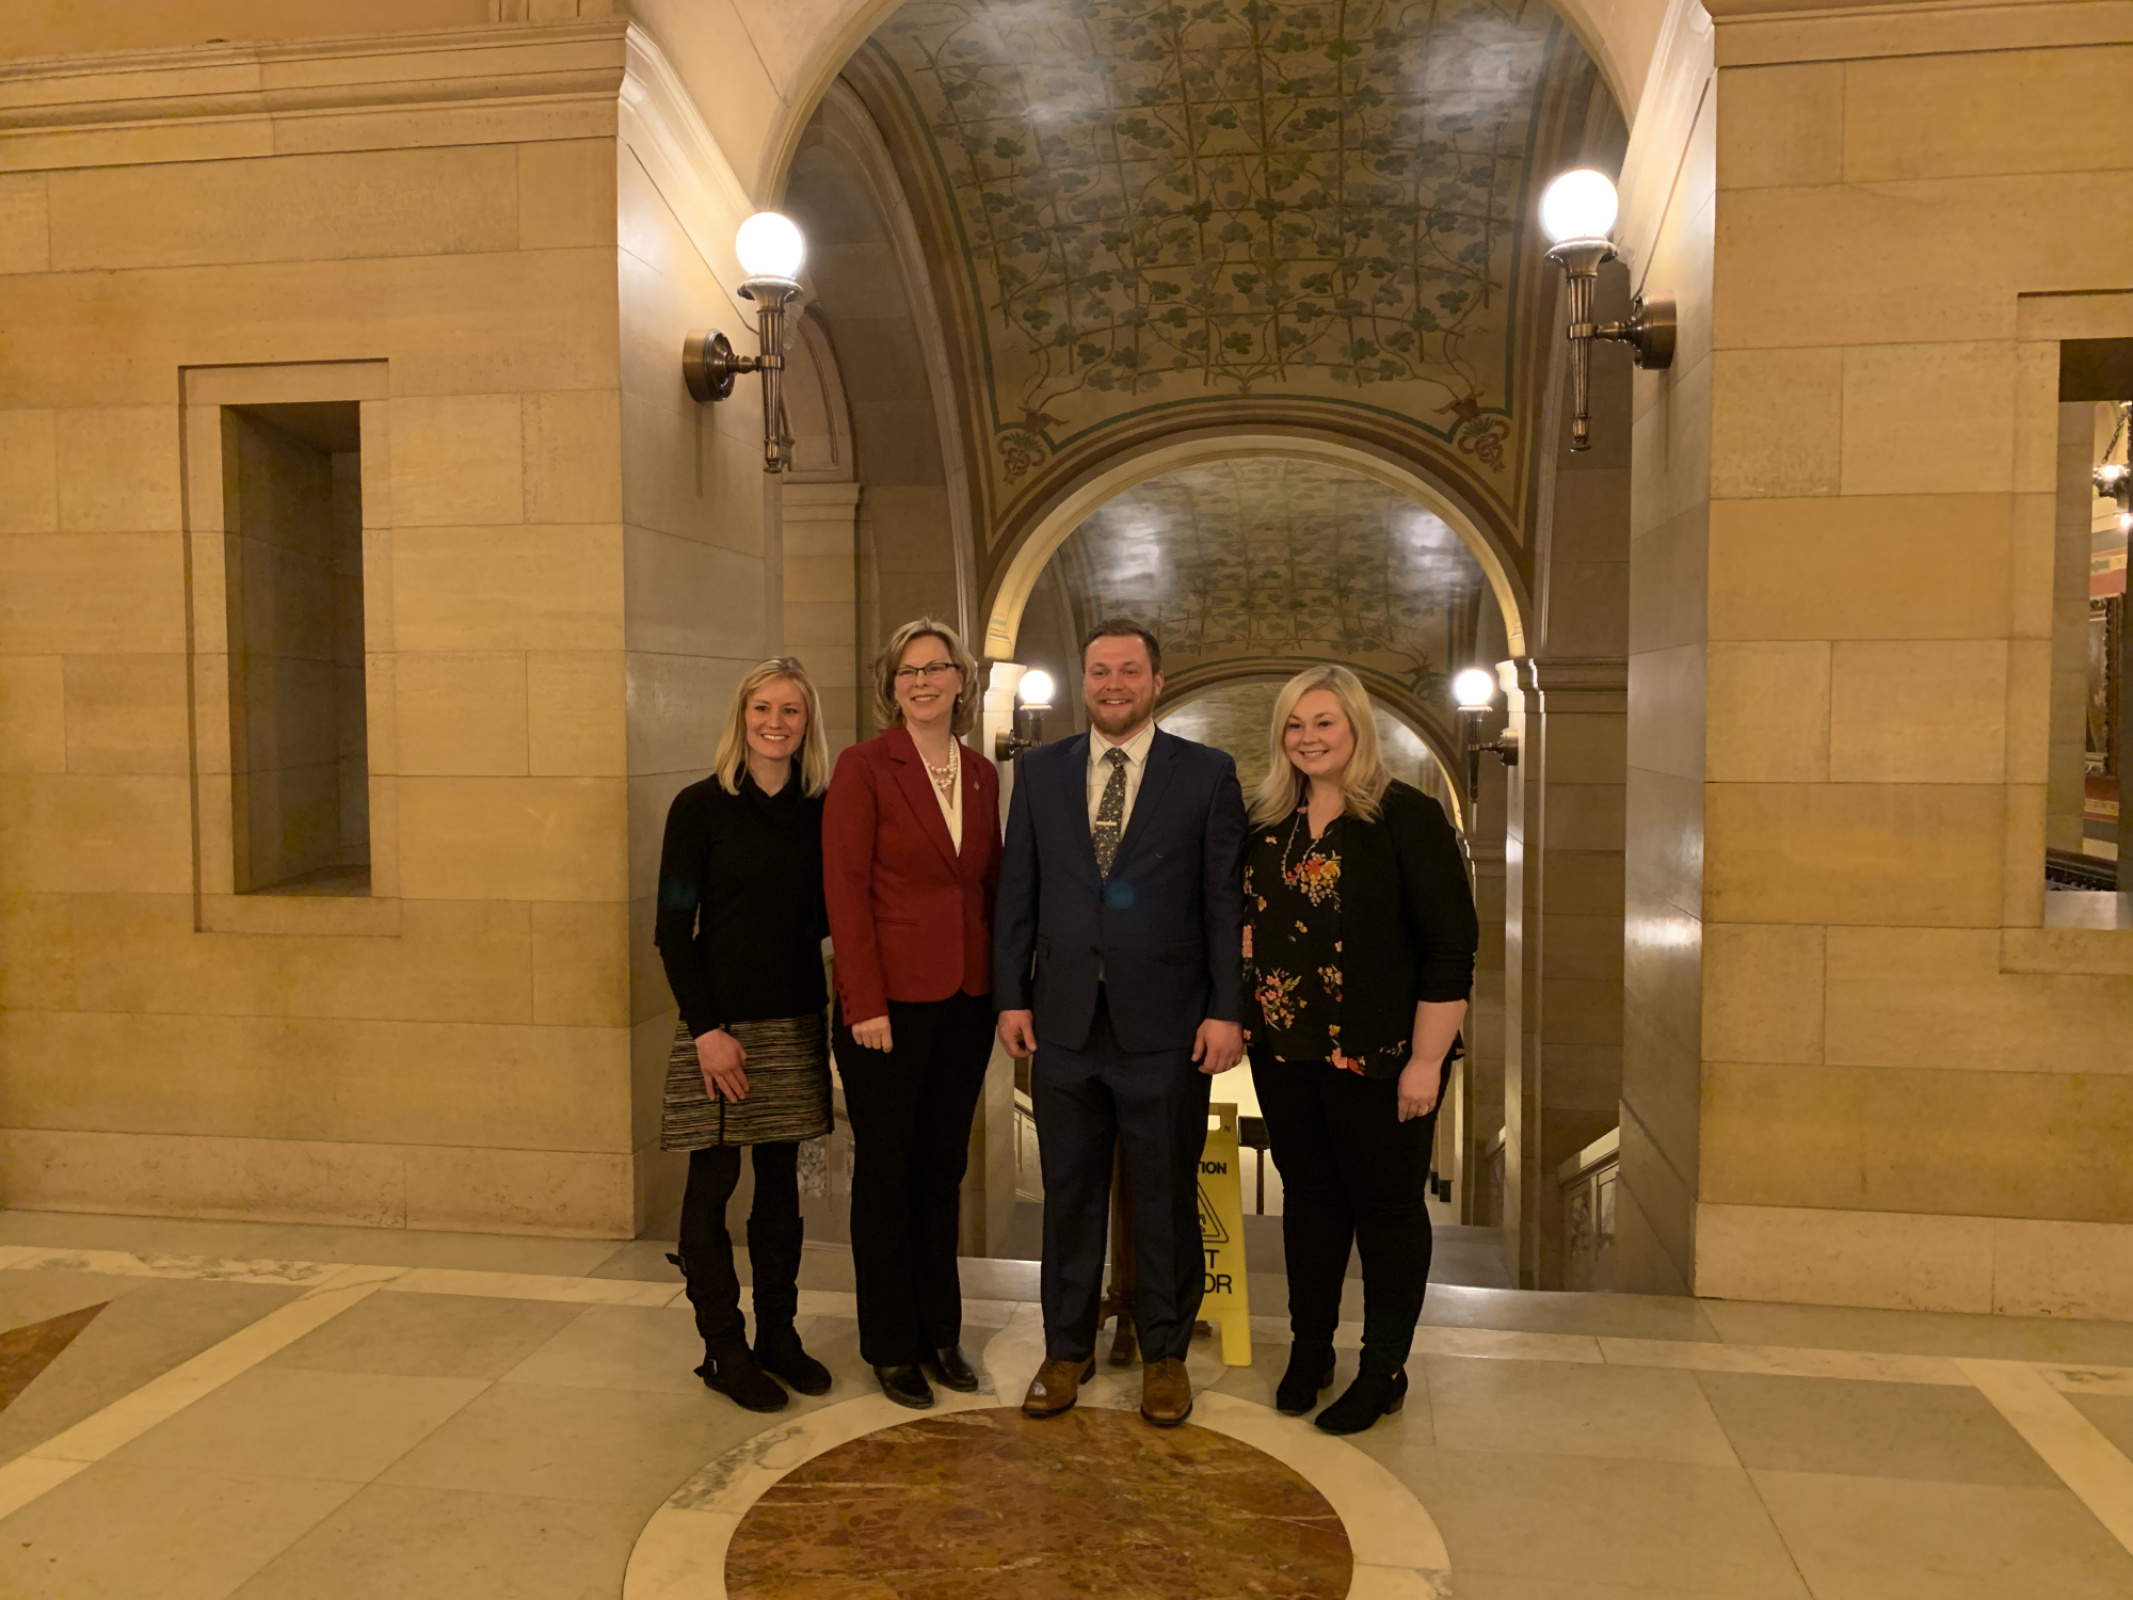 Lorna Schmidt, Representative Julie Sandstede, Andrew, and Ashley after their first testimony at the State Capitol.